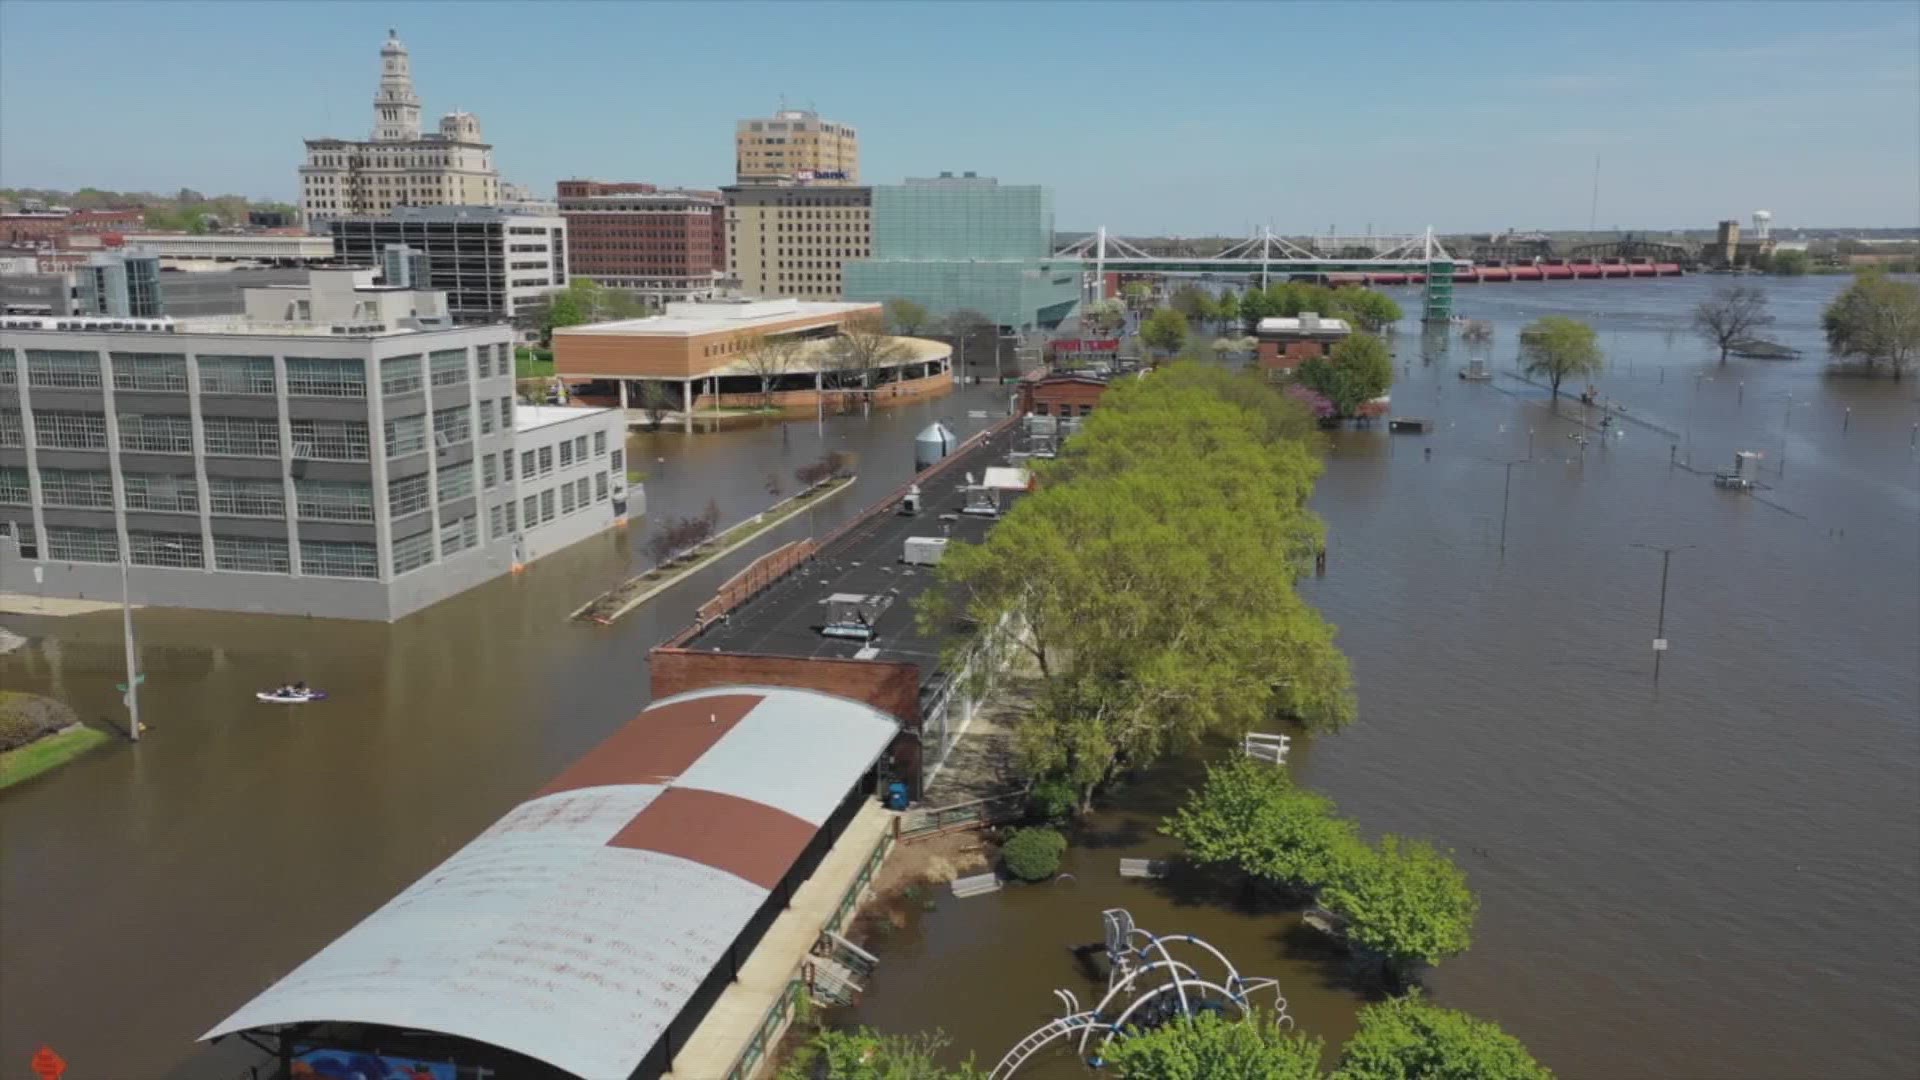 Forecasters predict an 80% chance of the Mississippi River reaching major flood stage in Davenport later this year. Here's how city officials are preparing residents